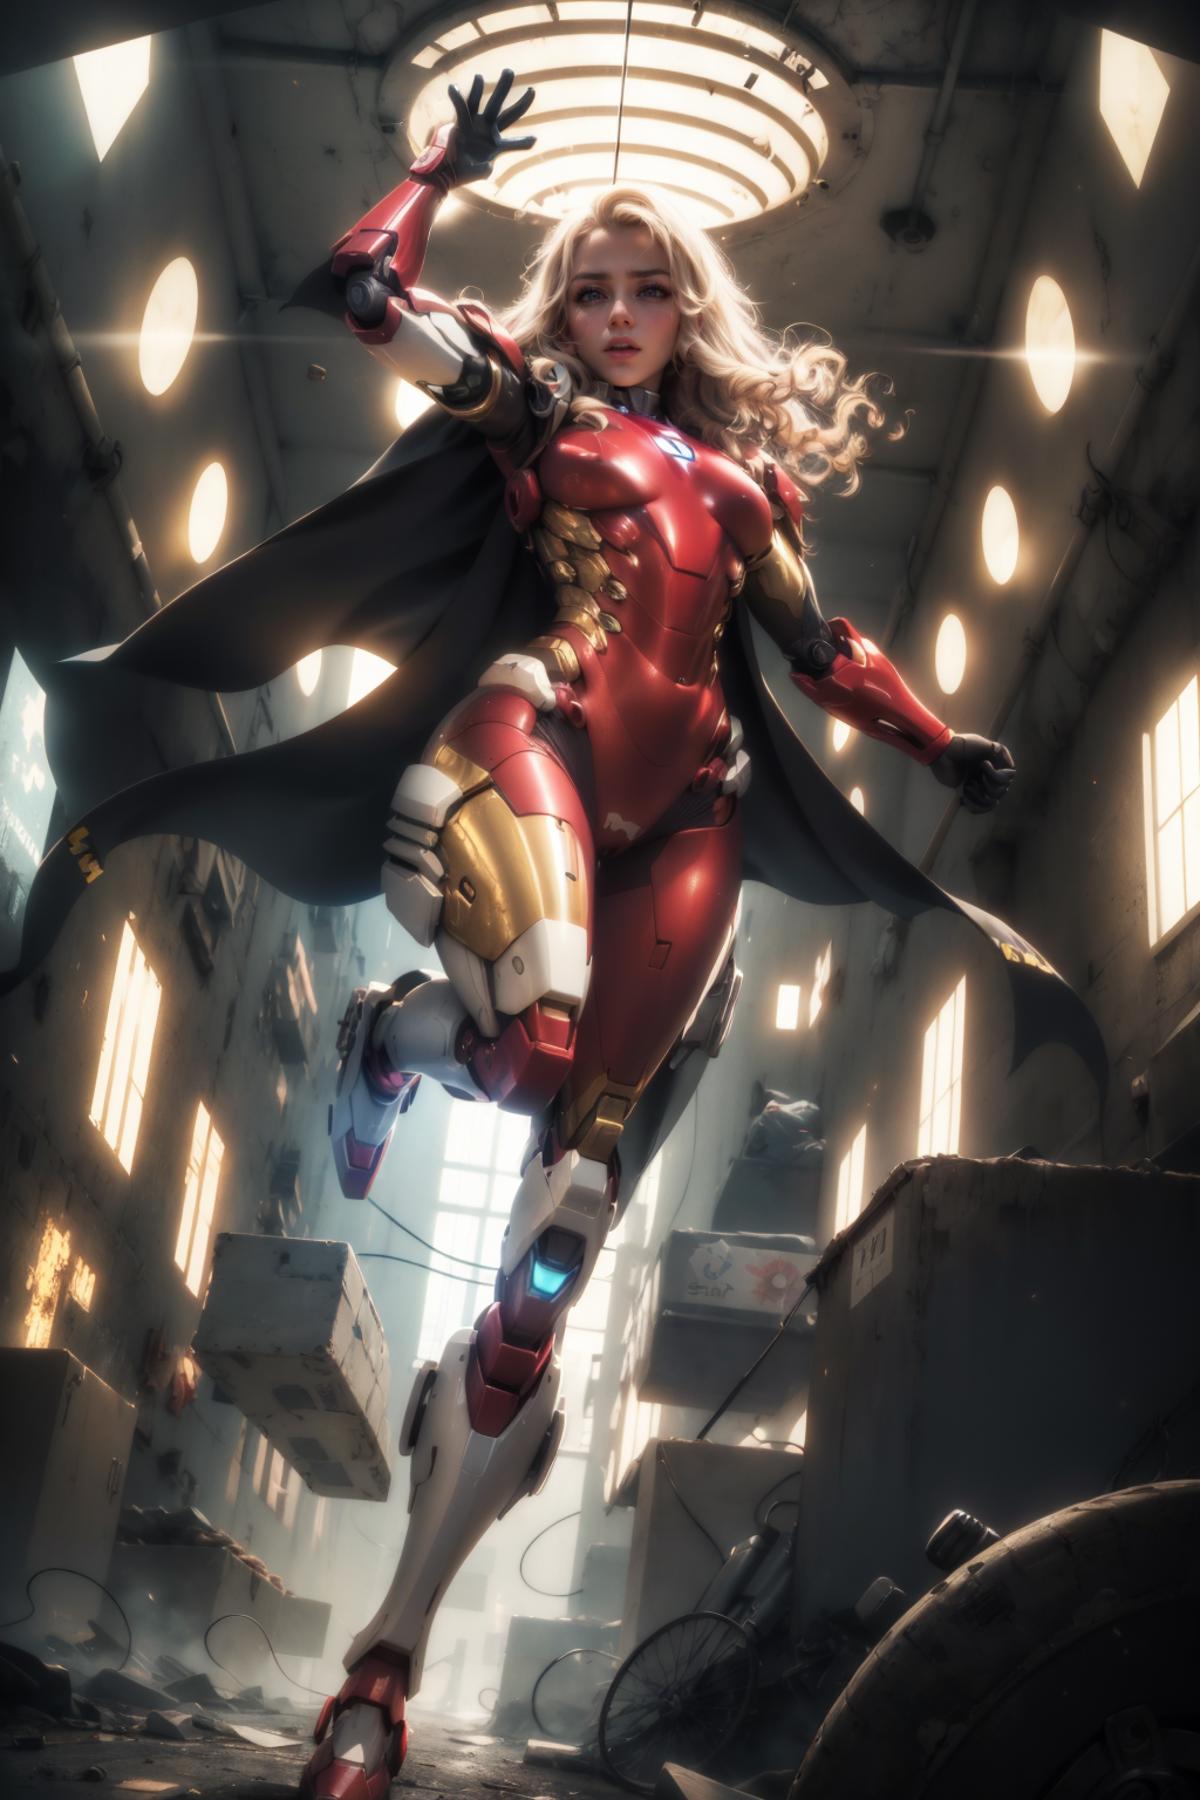 A Comic Book Art of Iron Man's Superheroine in Action.